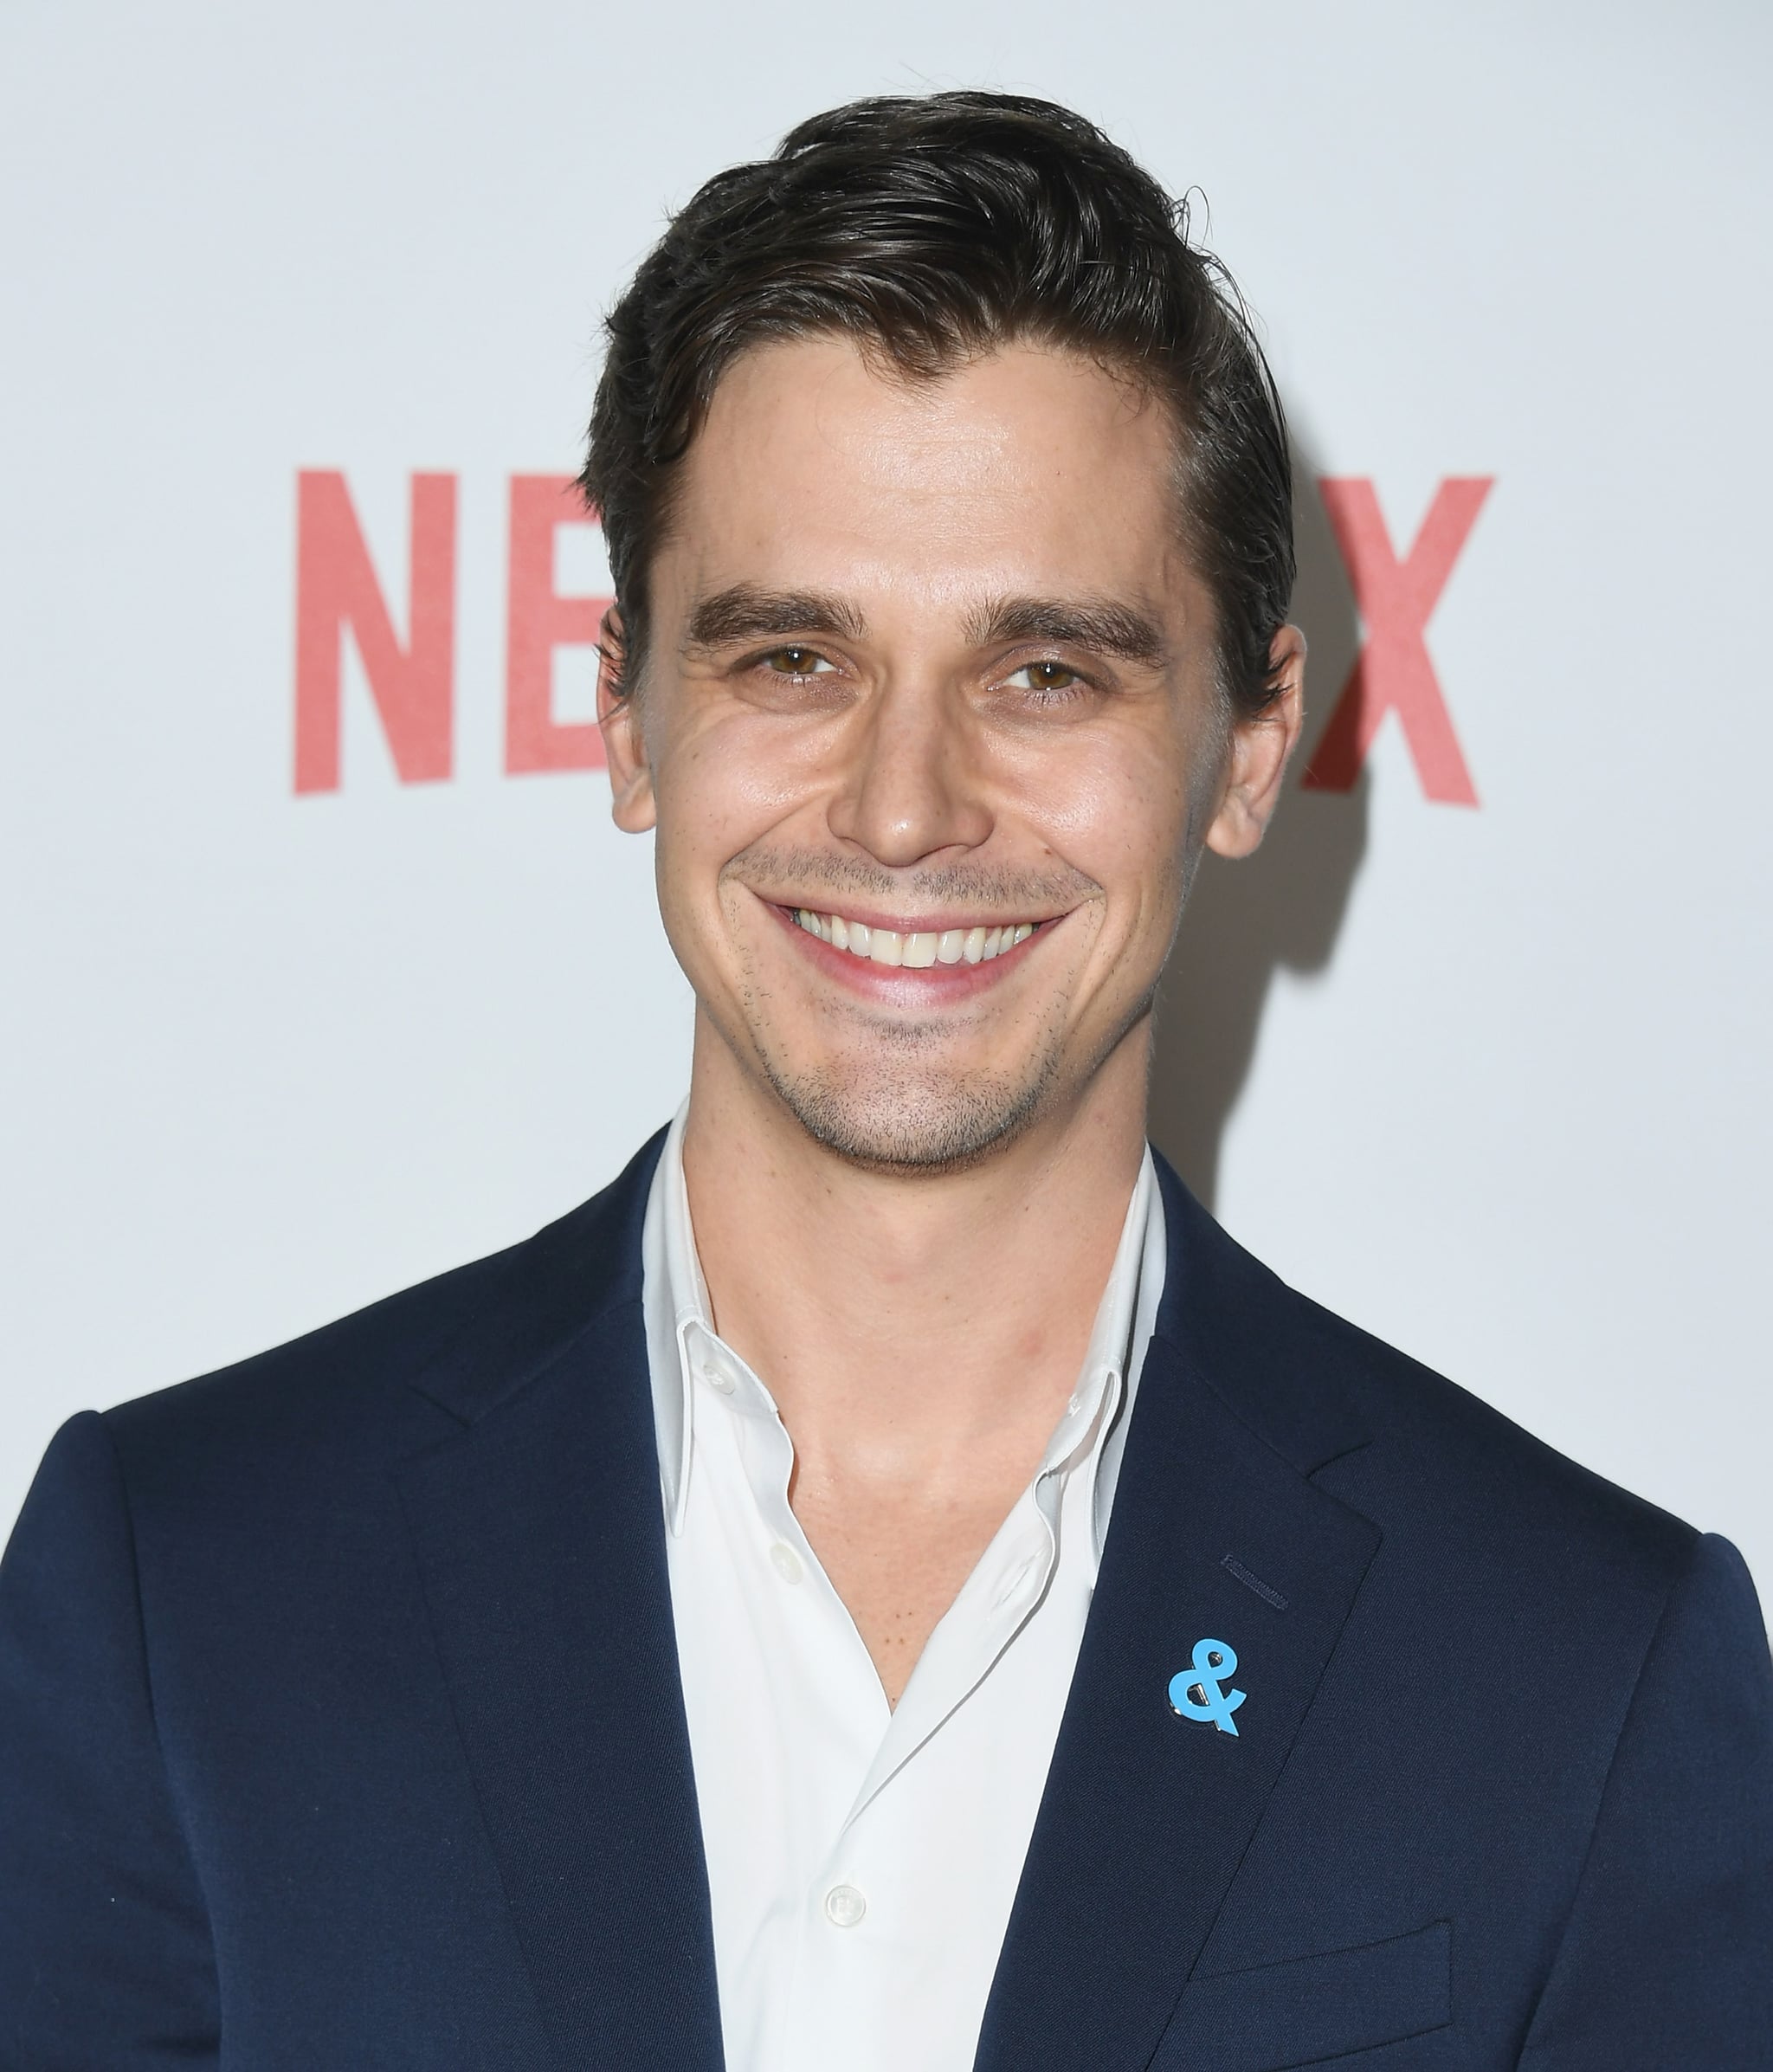 WEST HOLLYWOOD, CA - FEBRUARY 07:  Antoni Porowski attends the premiere of Netflix's 